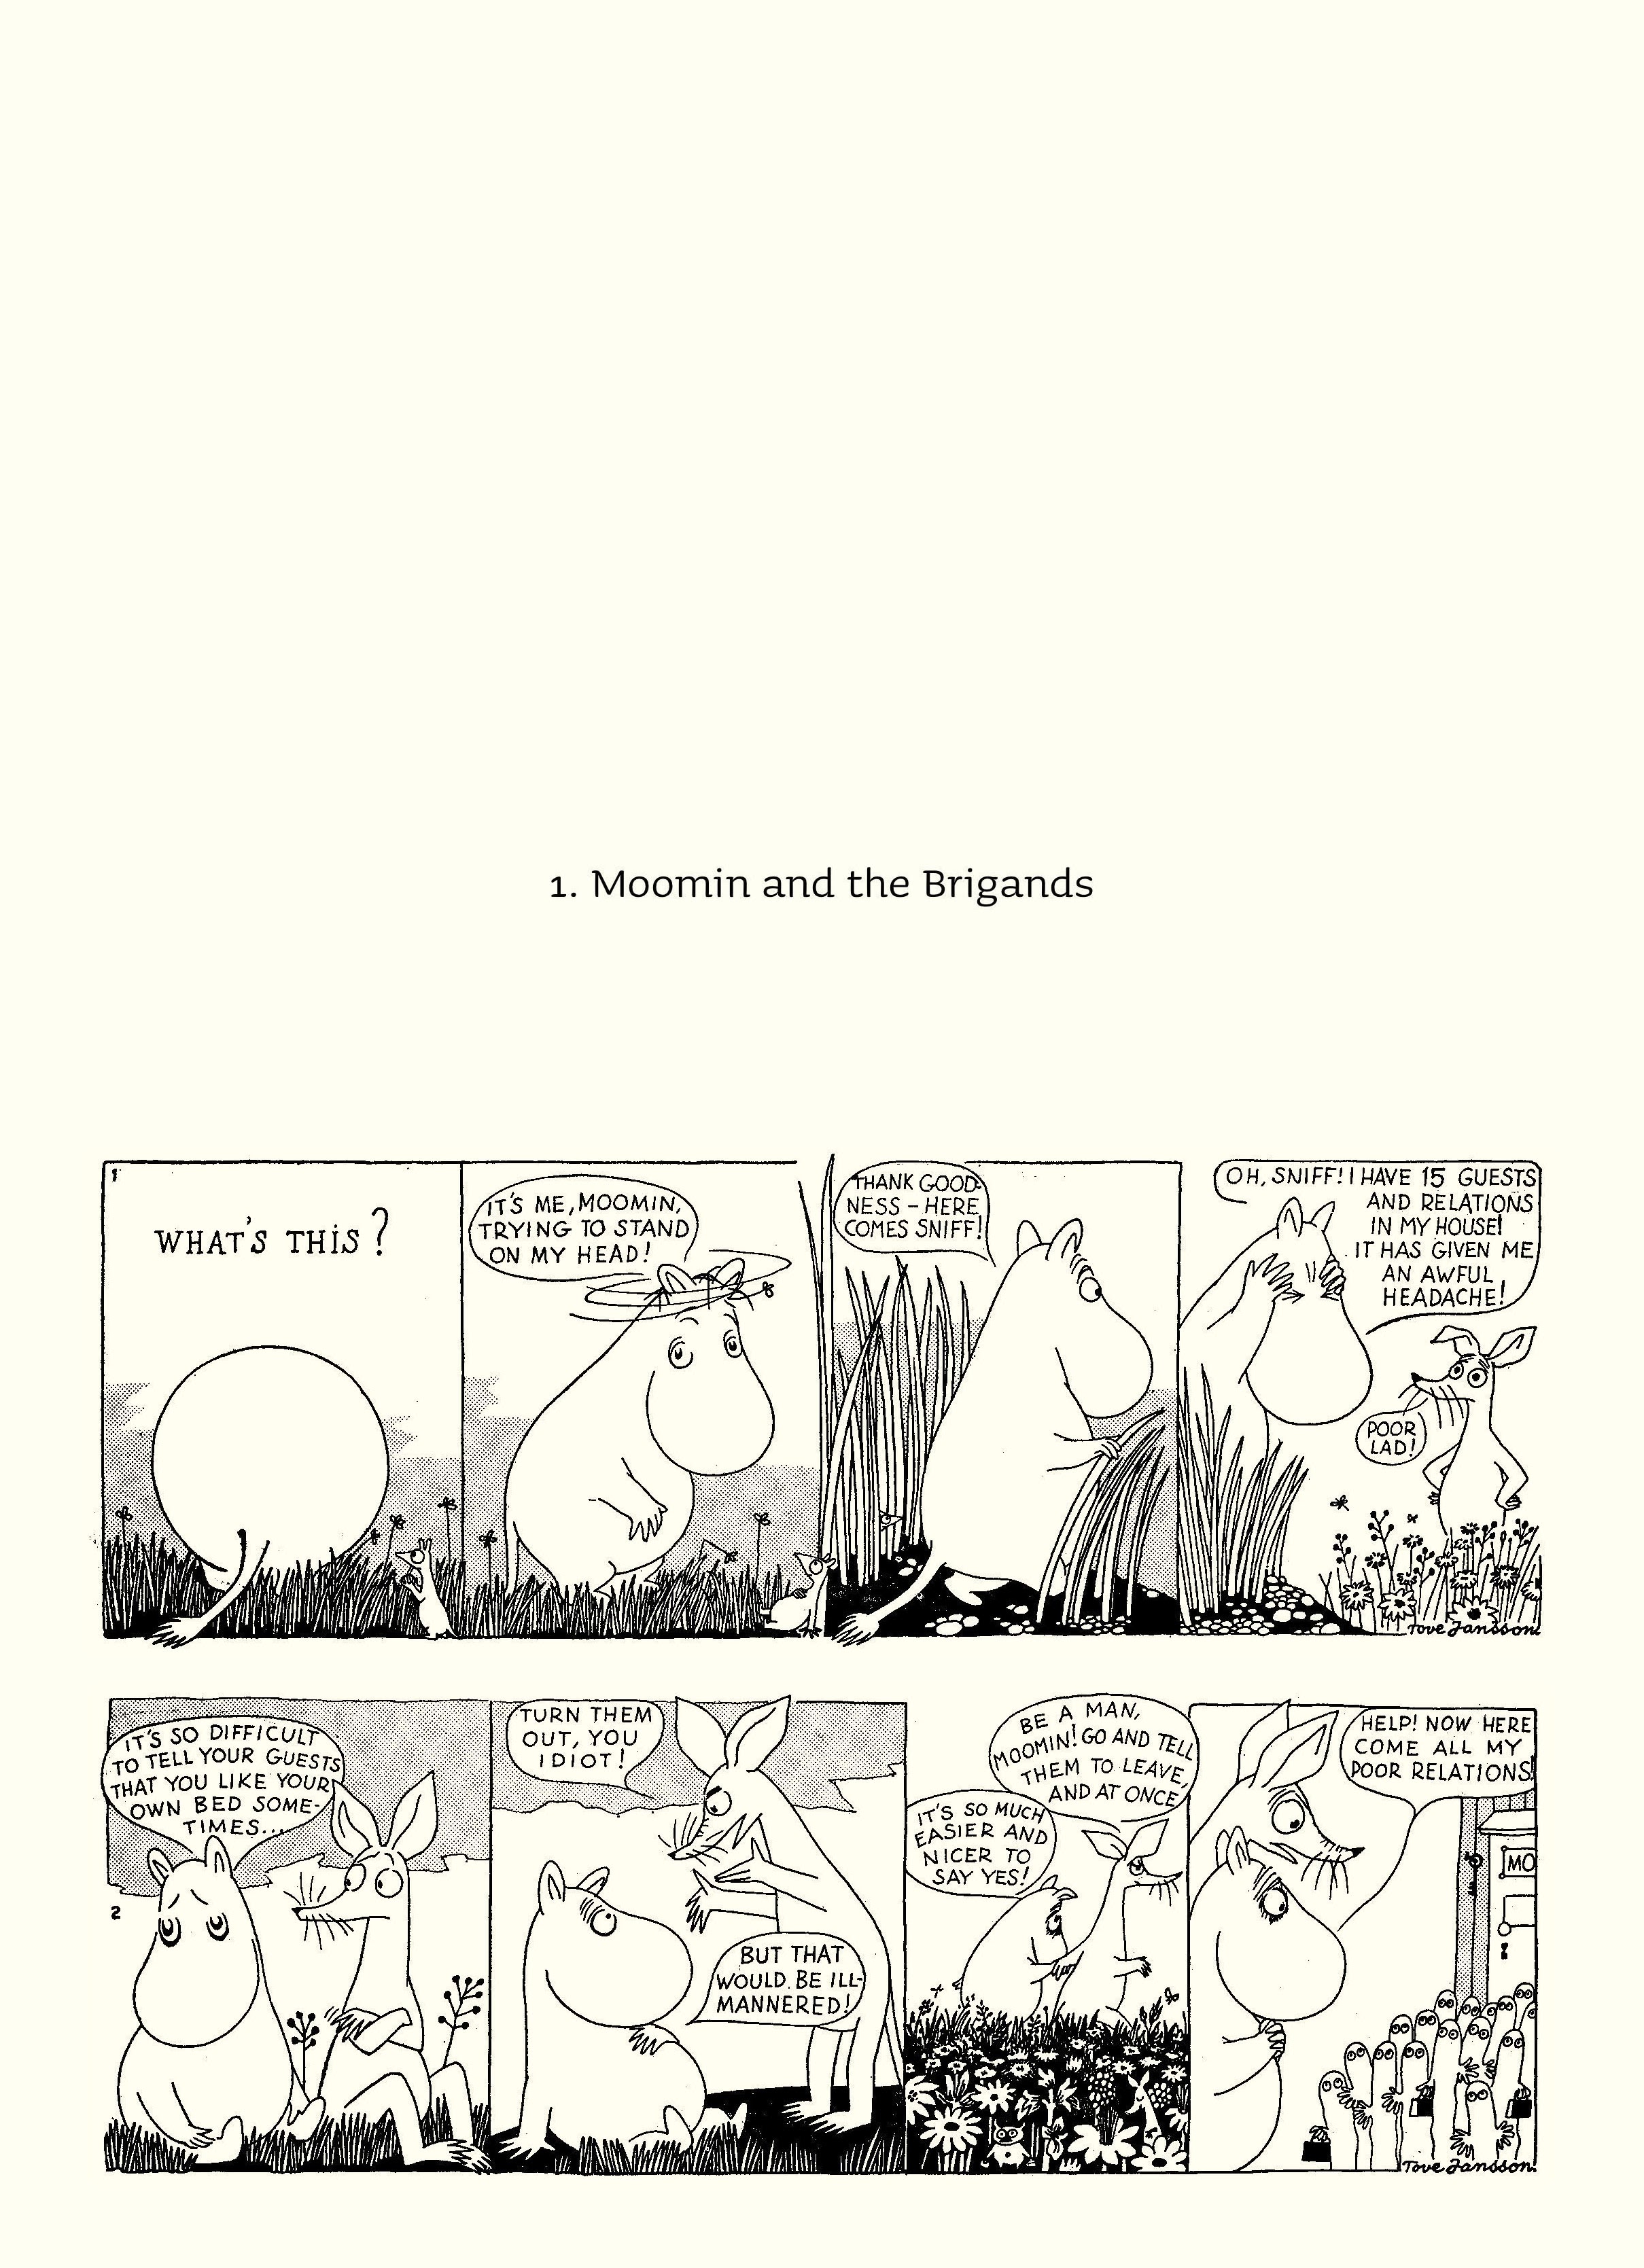 Read online Moomin: The Complete Tove Jansson Comic Strip comic -  Issue # TPB 1 - 6